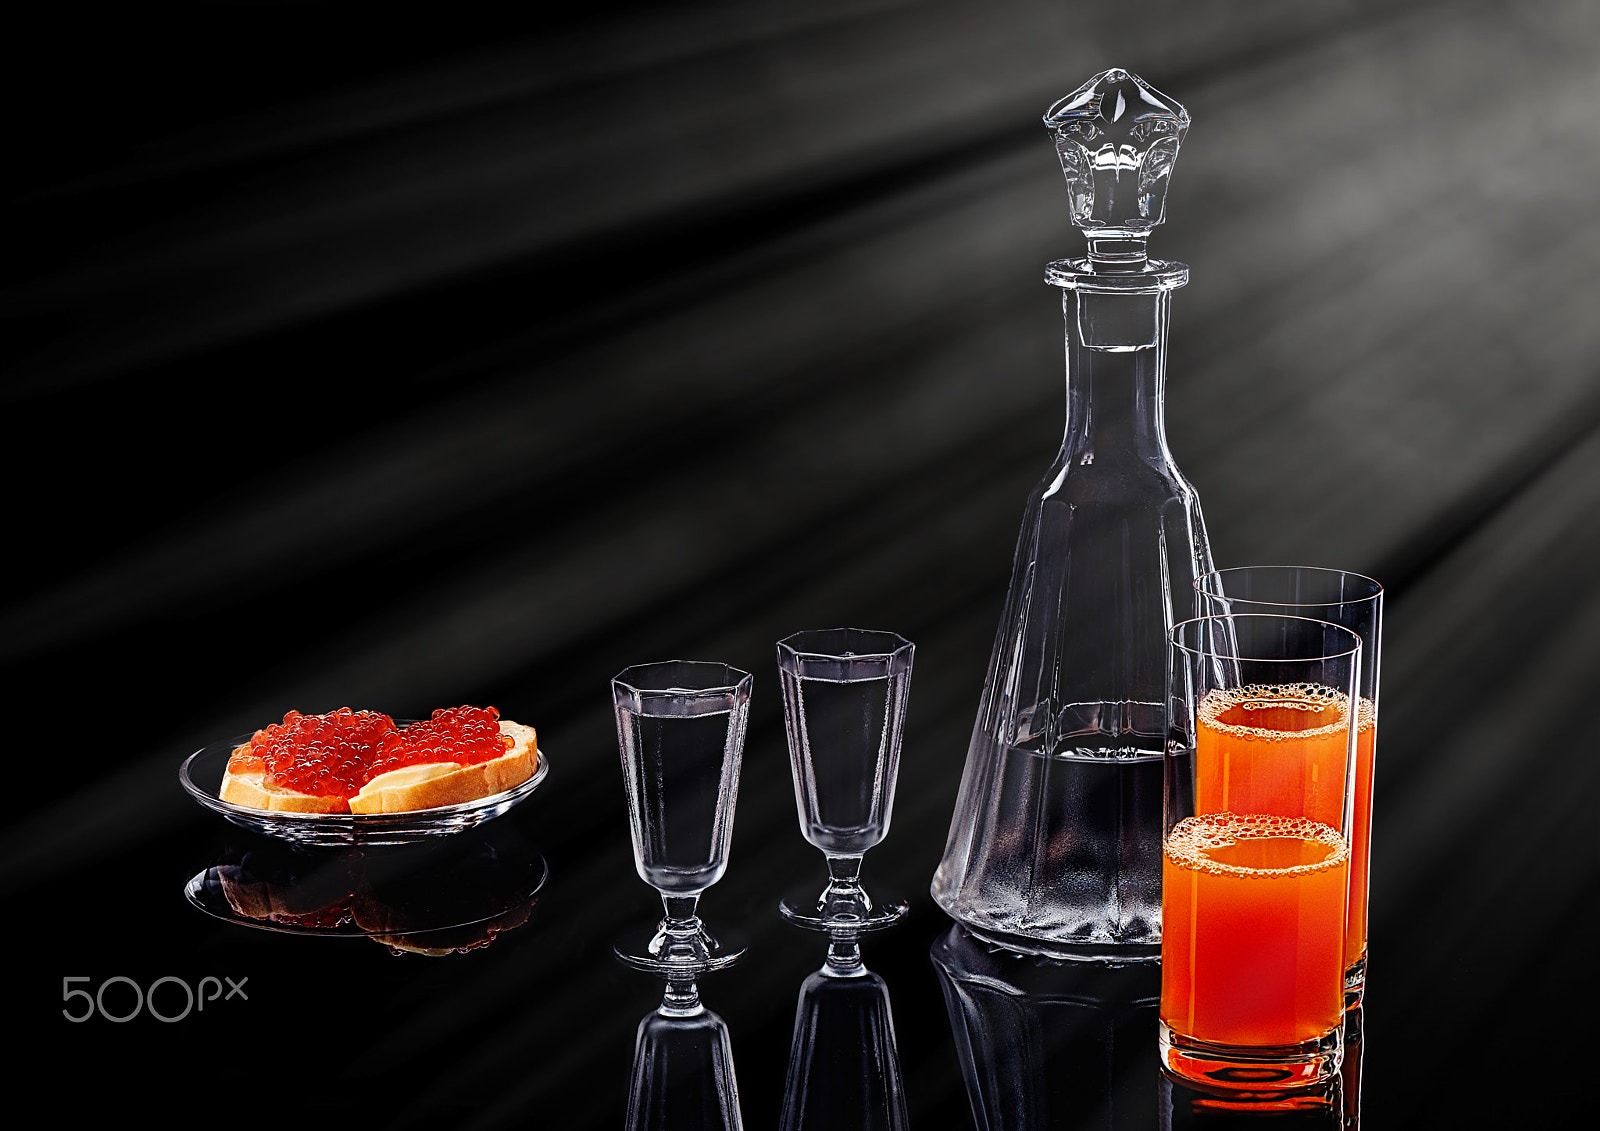 Nikon D800 sample photo. Decanter and two shot glasses with ice vodka, two salmon red caviar sandwiches on a glass plate... photography